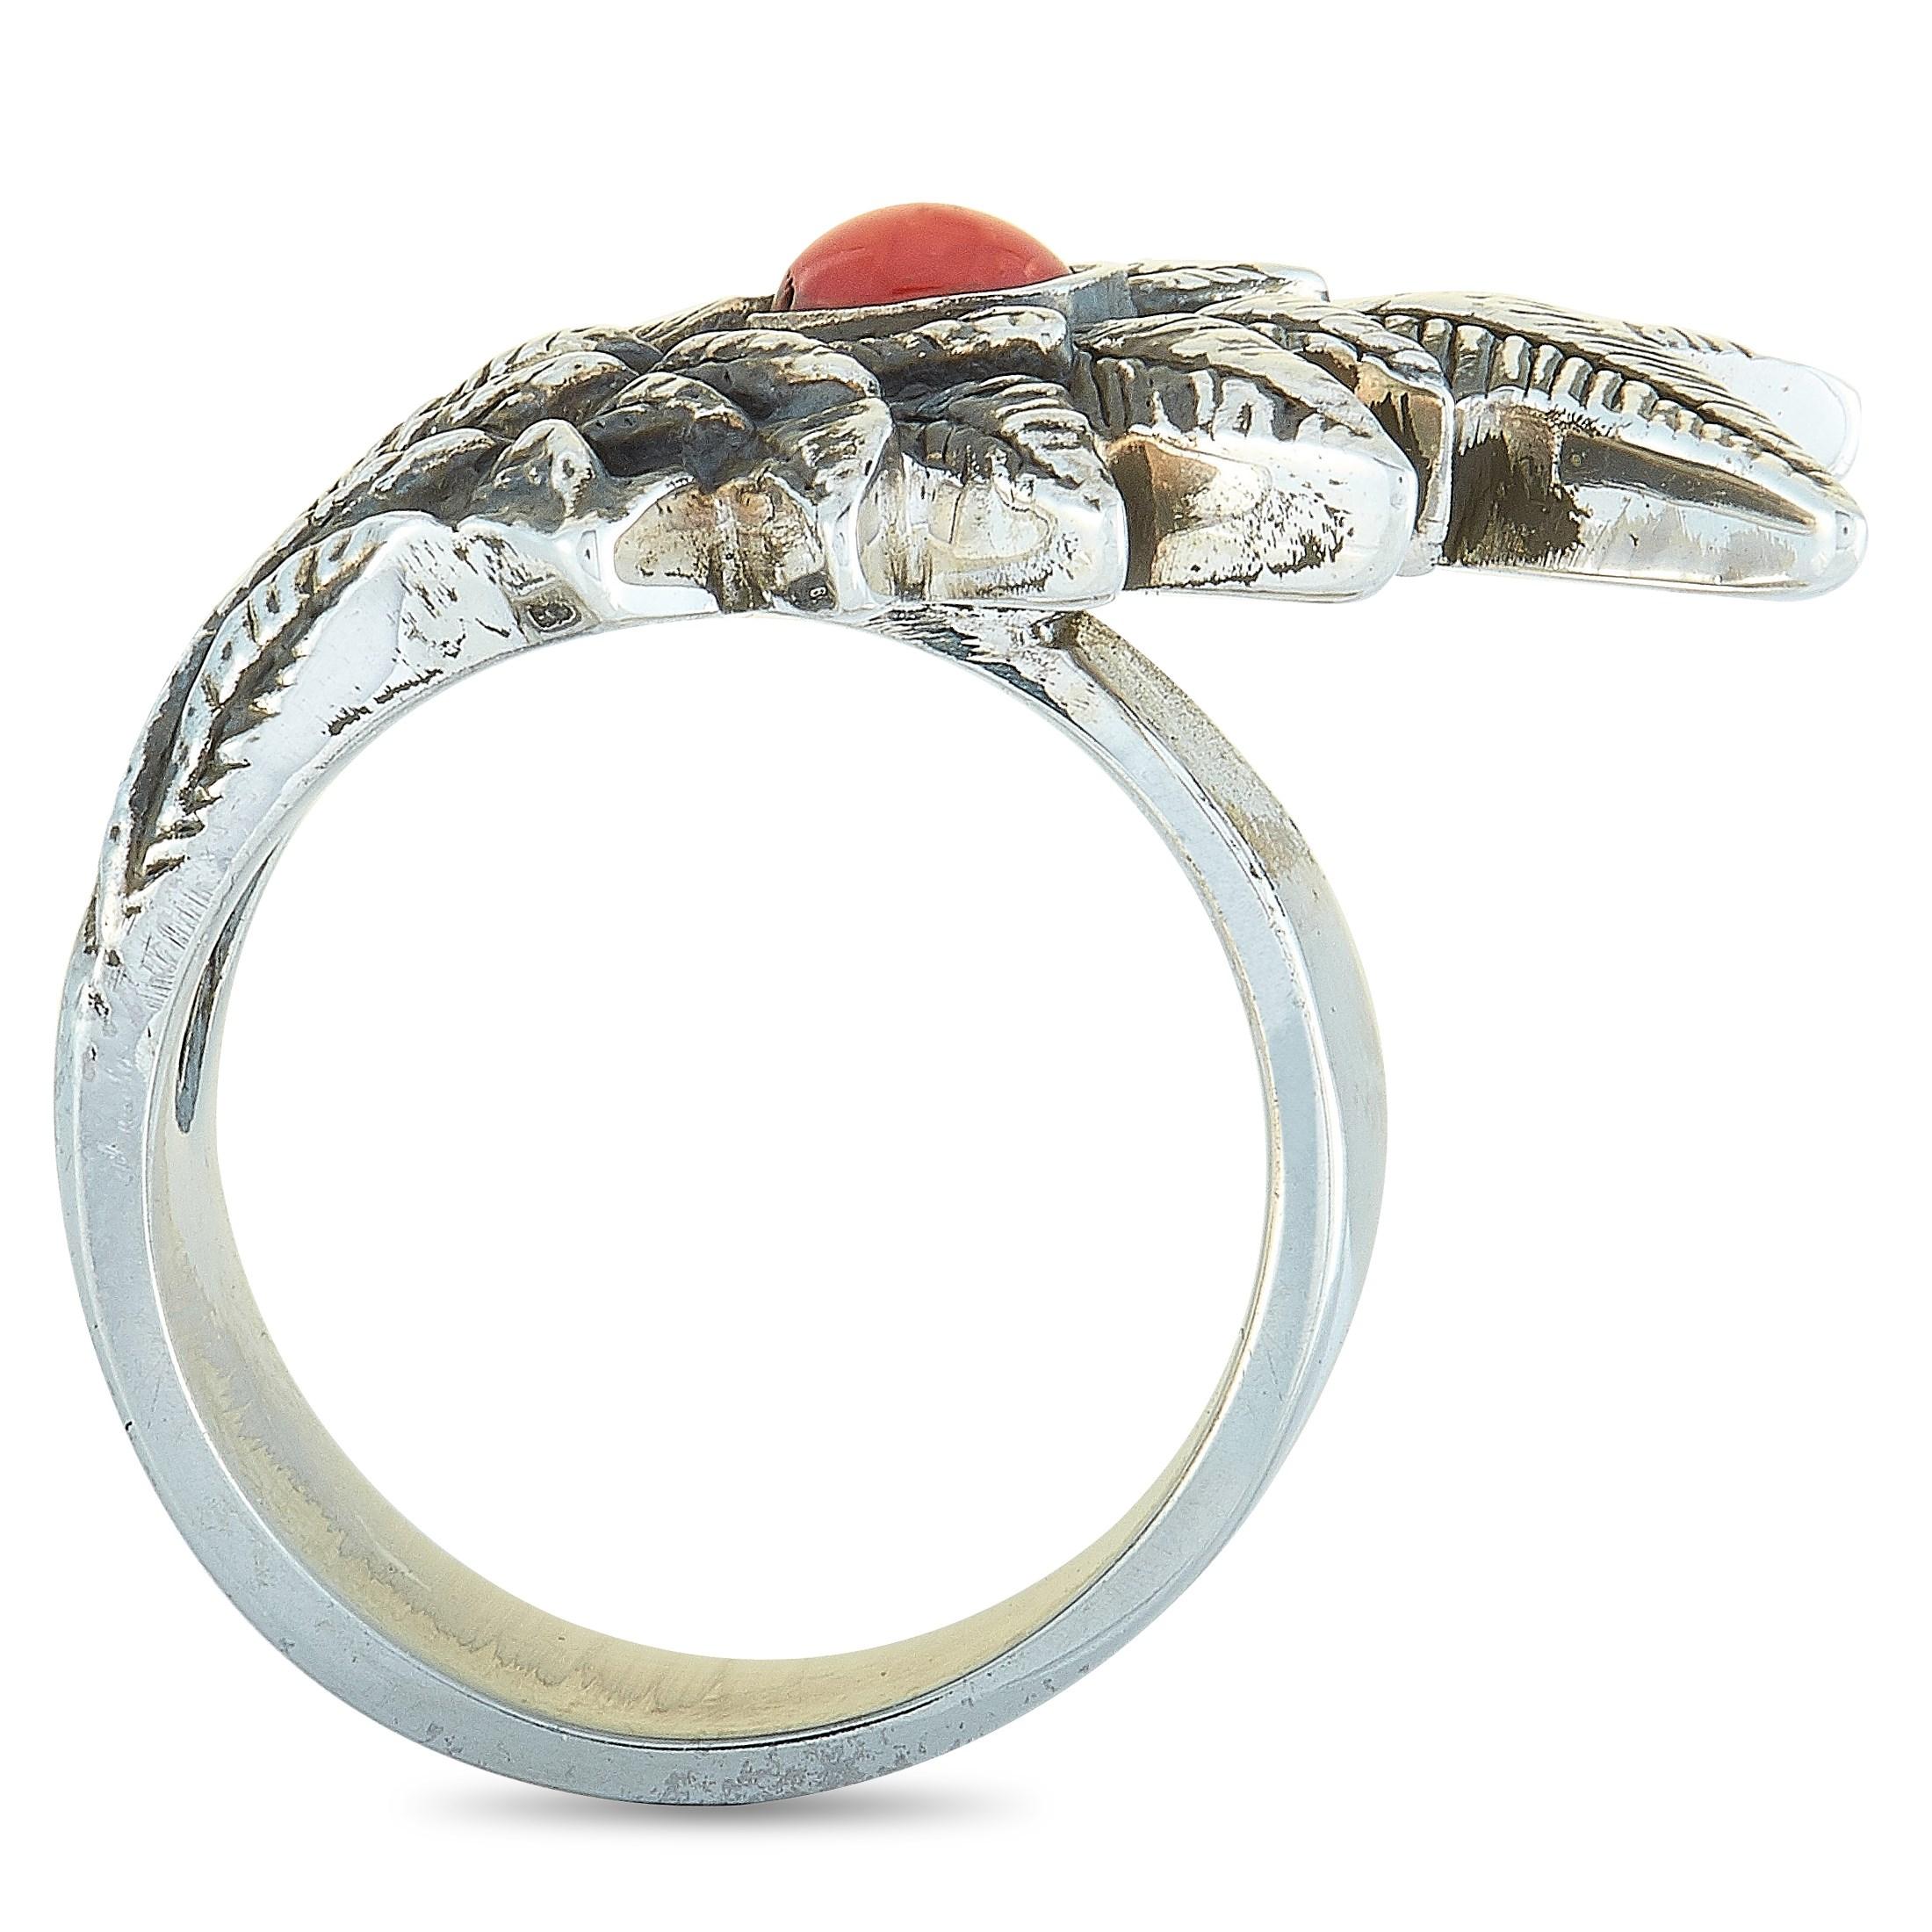 The King Baby “Raven Wing” ring is crafted from sterling silver and set with a coral cabochon. The ring weighs 28.1 grams and boasts a band thickness of 7 mm and top height of 7 mm, while top dimensions measure 32 by 21 mm.

This item is offered in